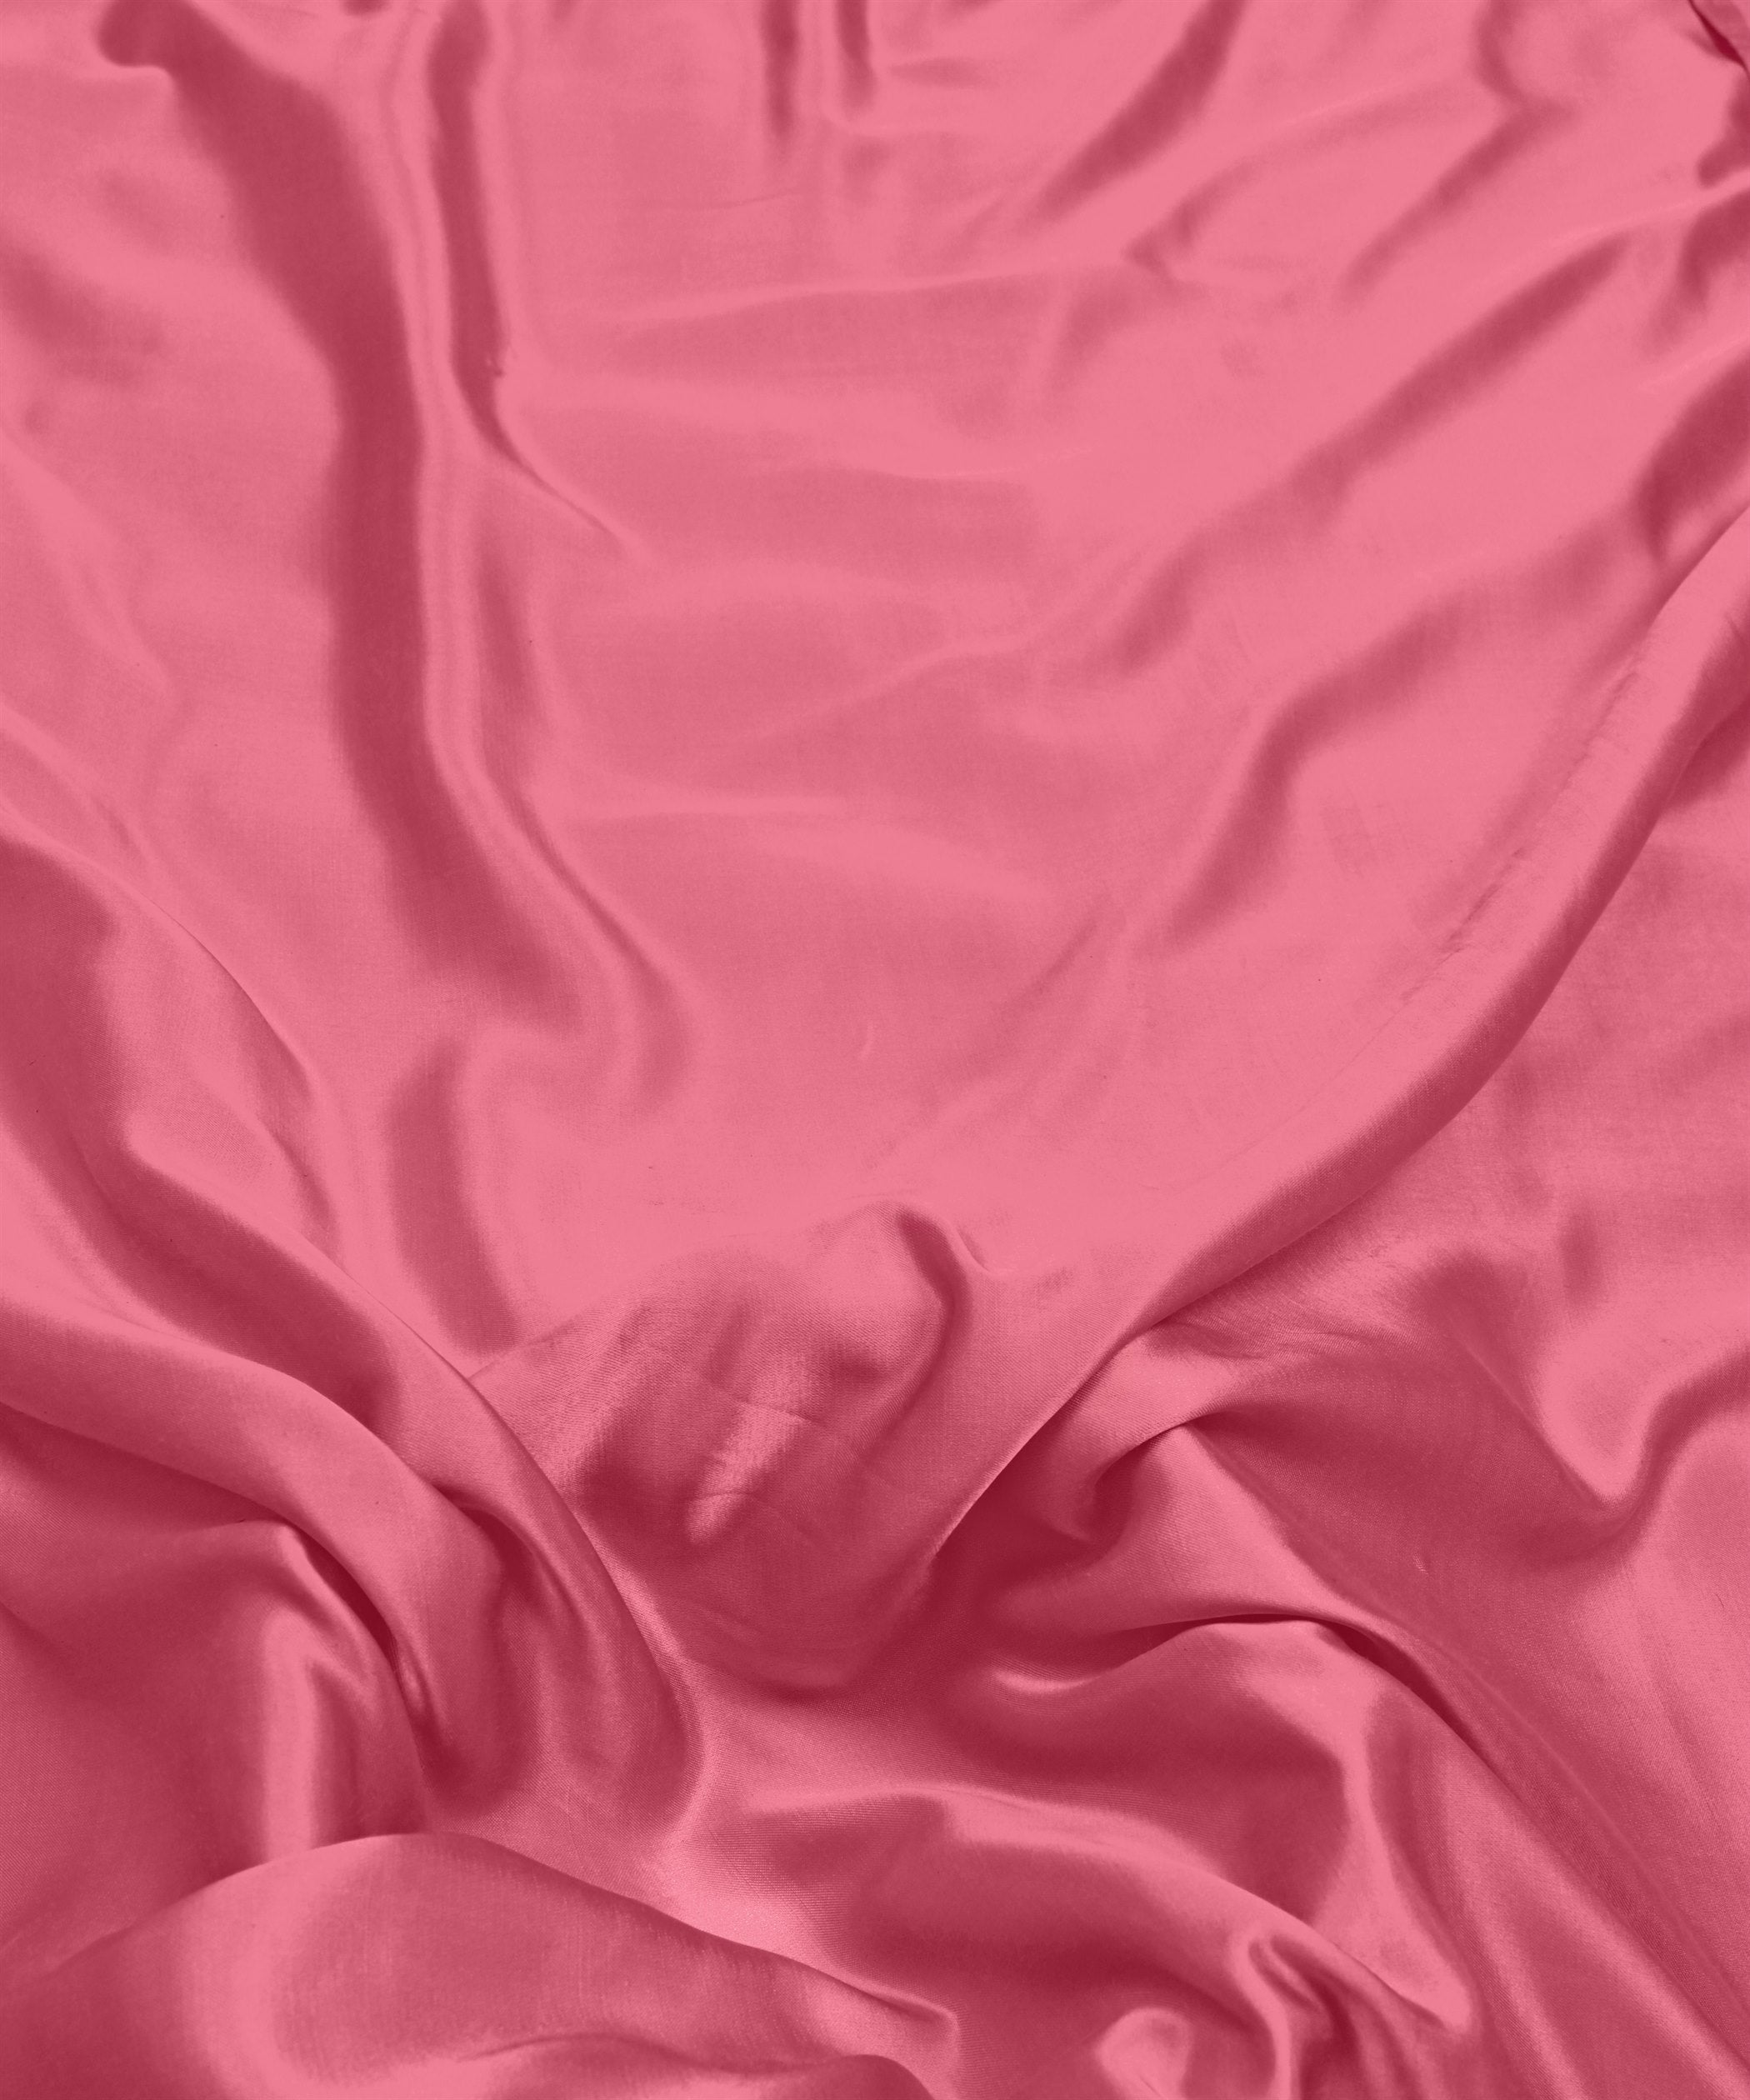 Punch Pink Plain Dyed Modal Satin Fabric